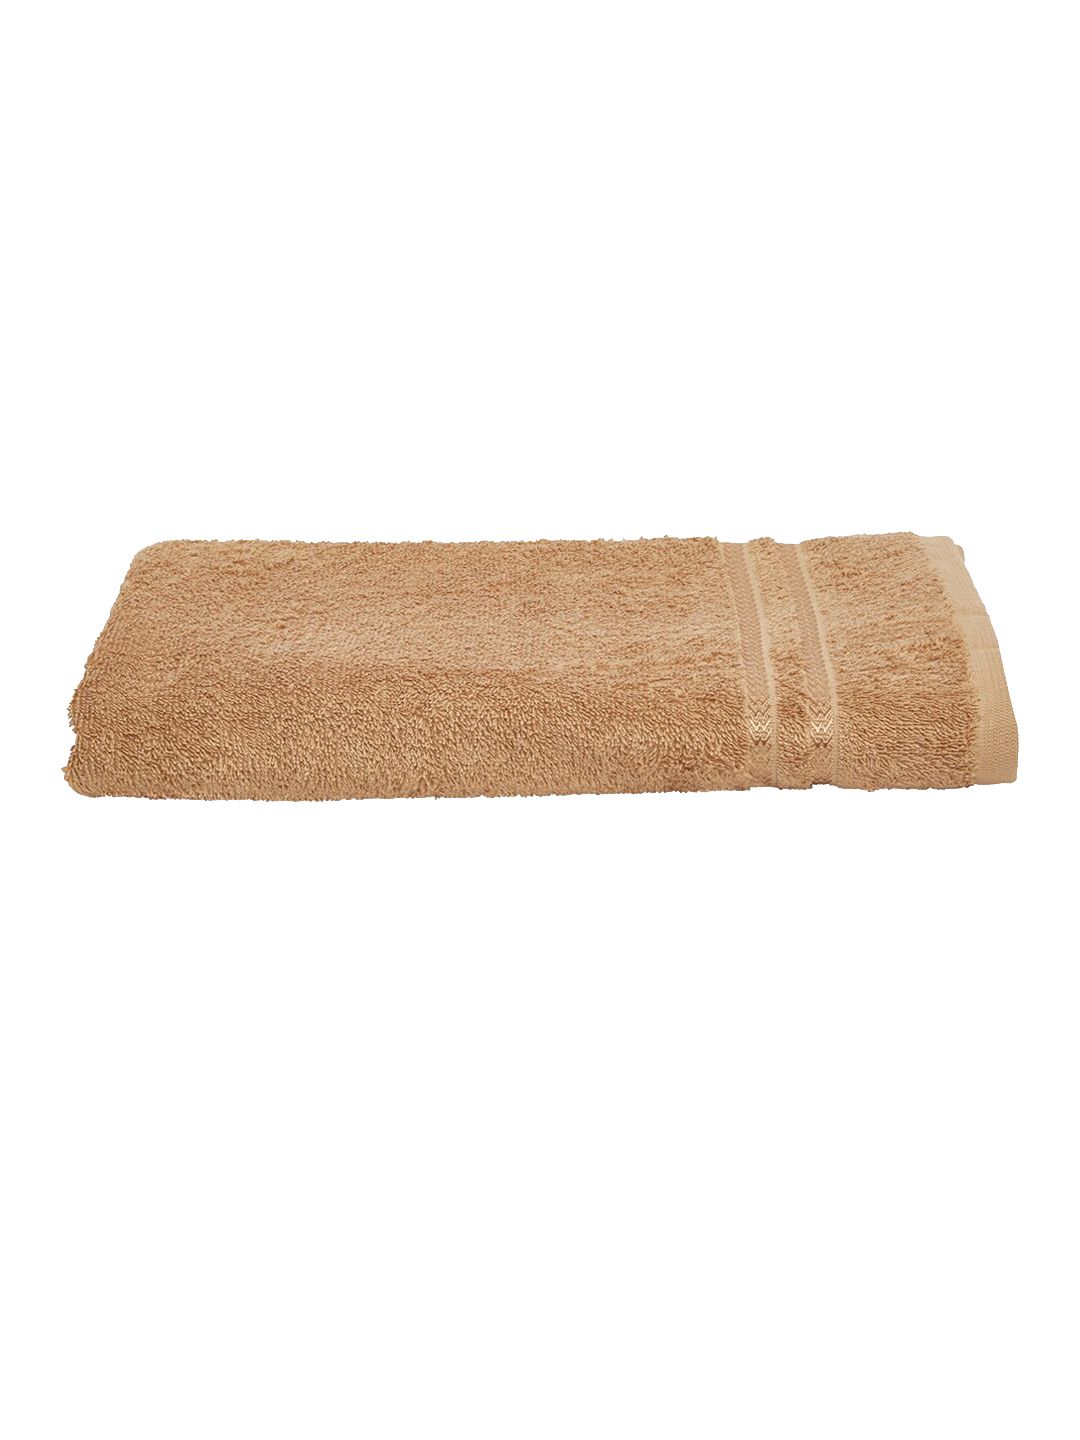 Welspun Tan Brown Solid 380GSM Pure Cotton Quick Dry High Absorbency Bath Towel Price in India